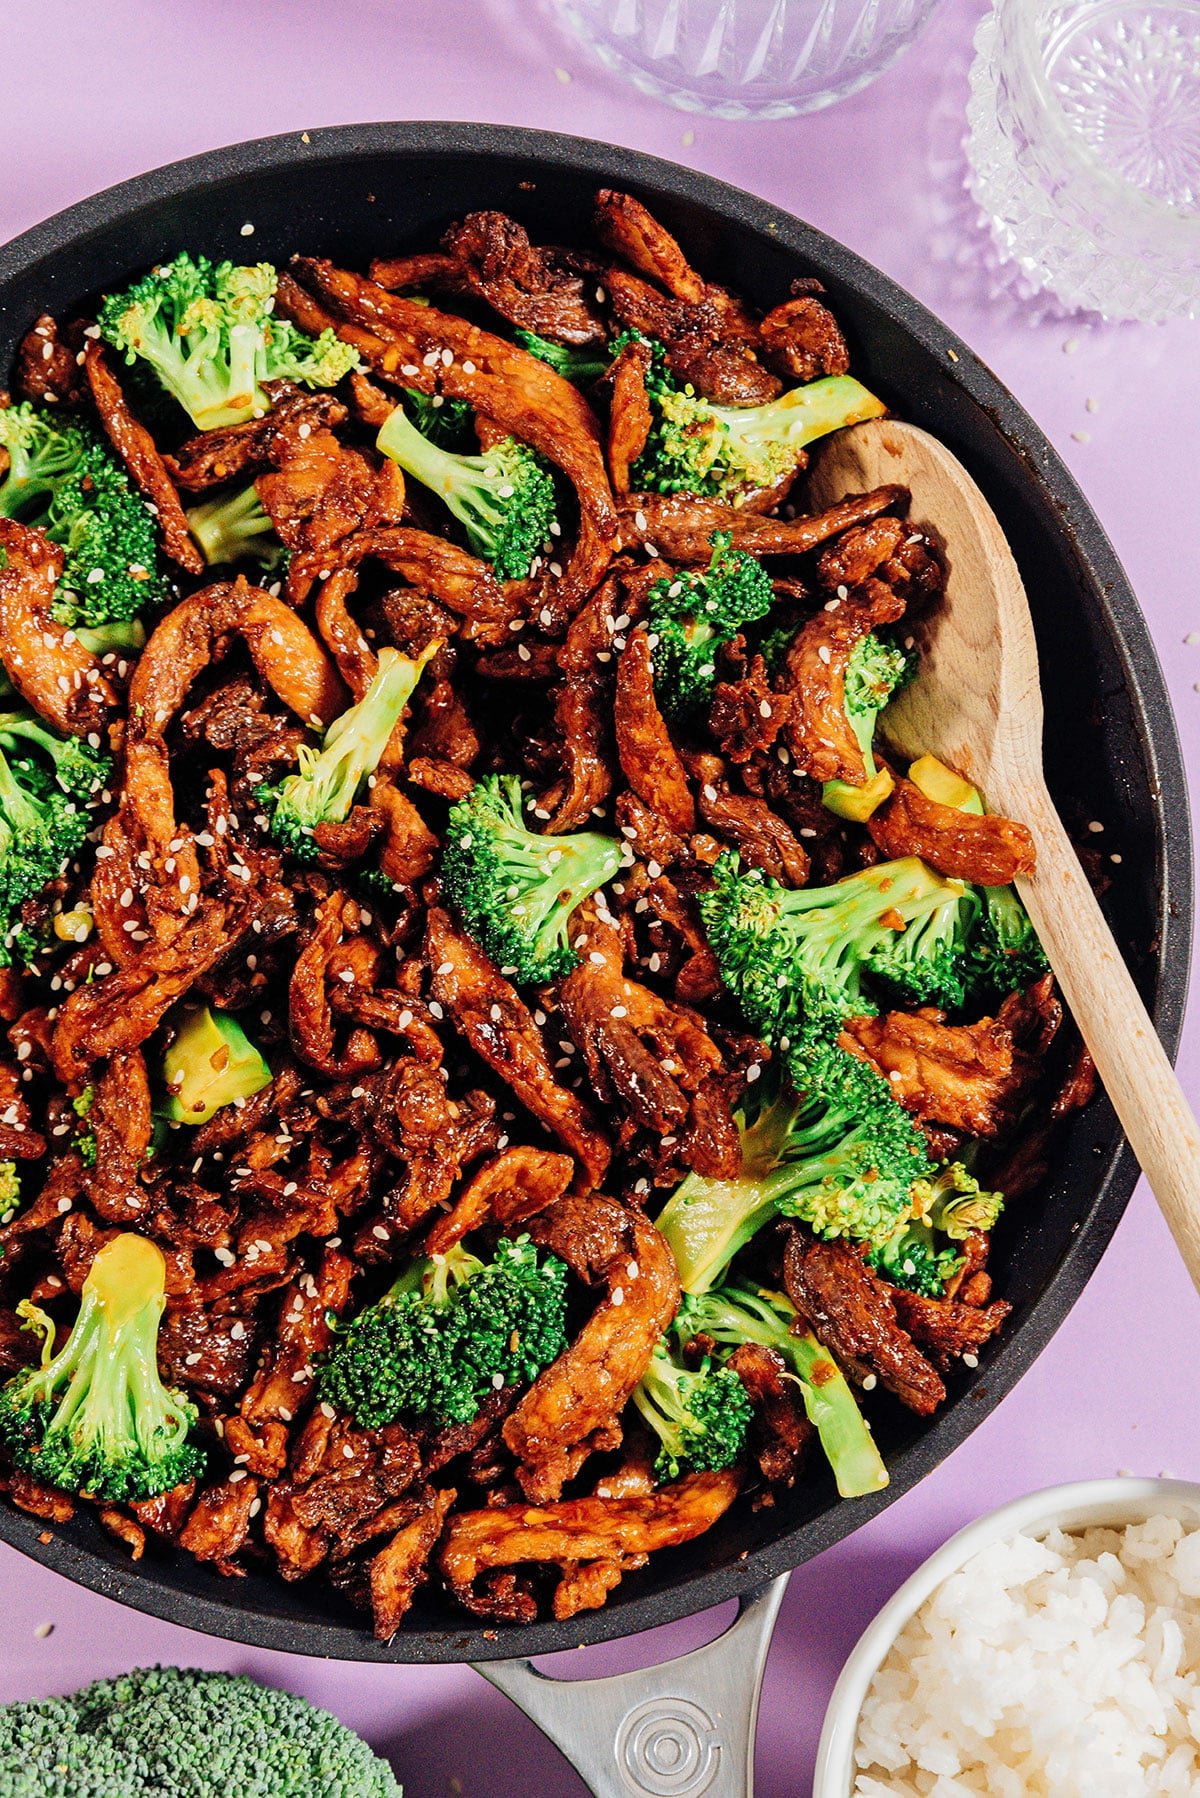 Vegan beef and broccoli in a saute pan.